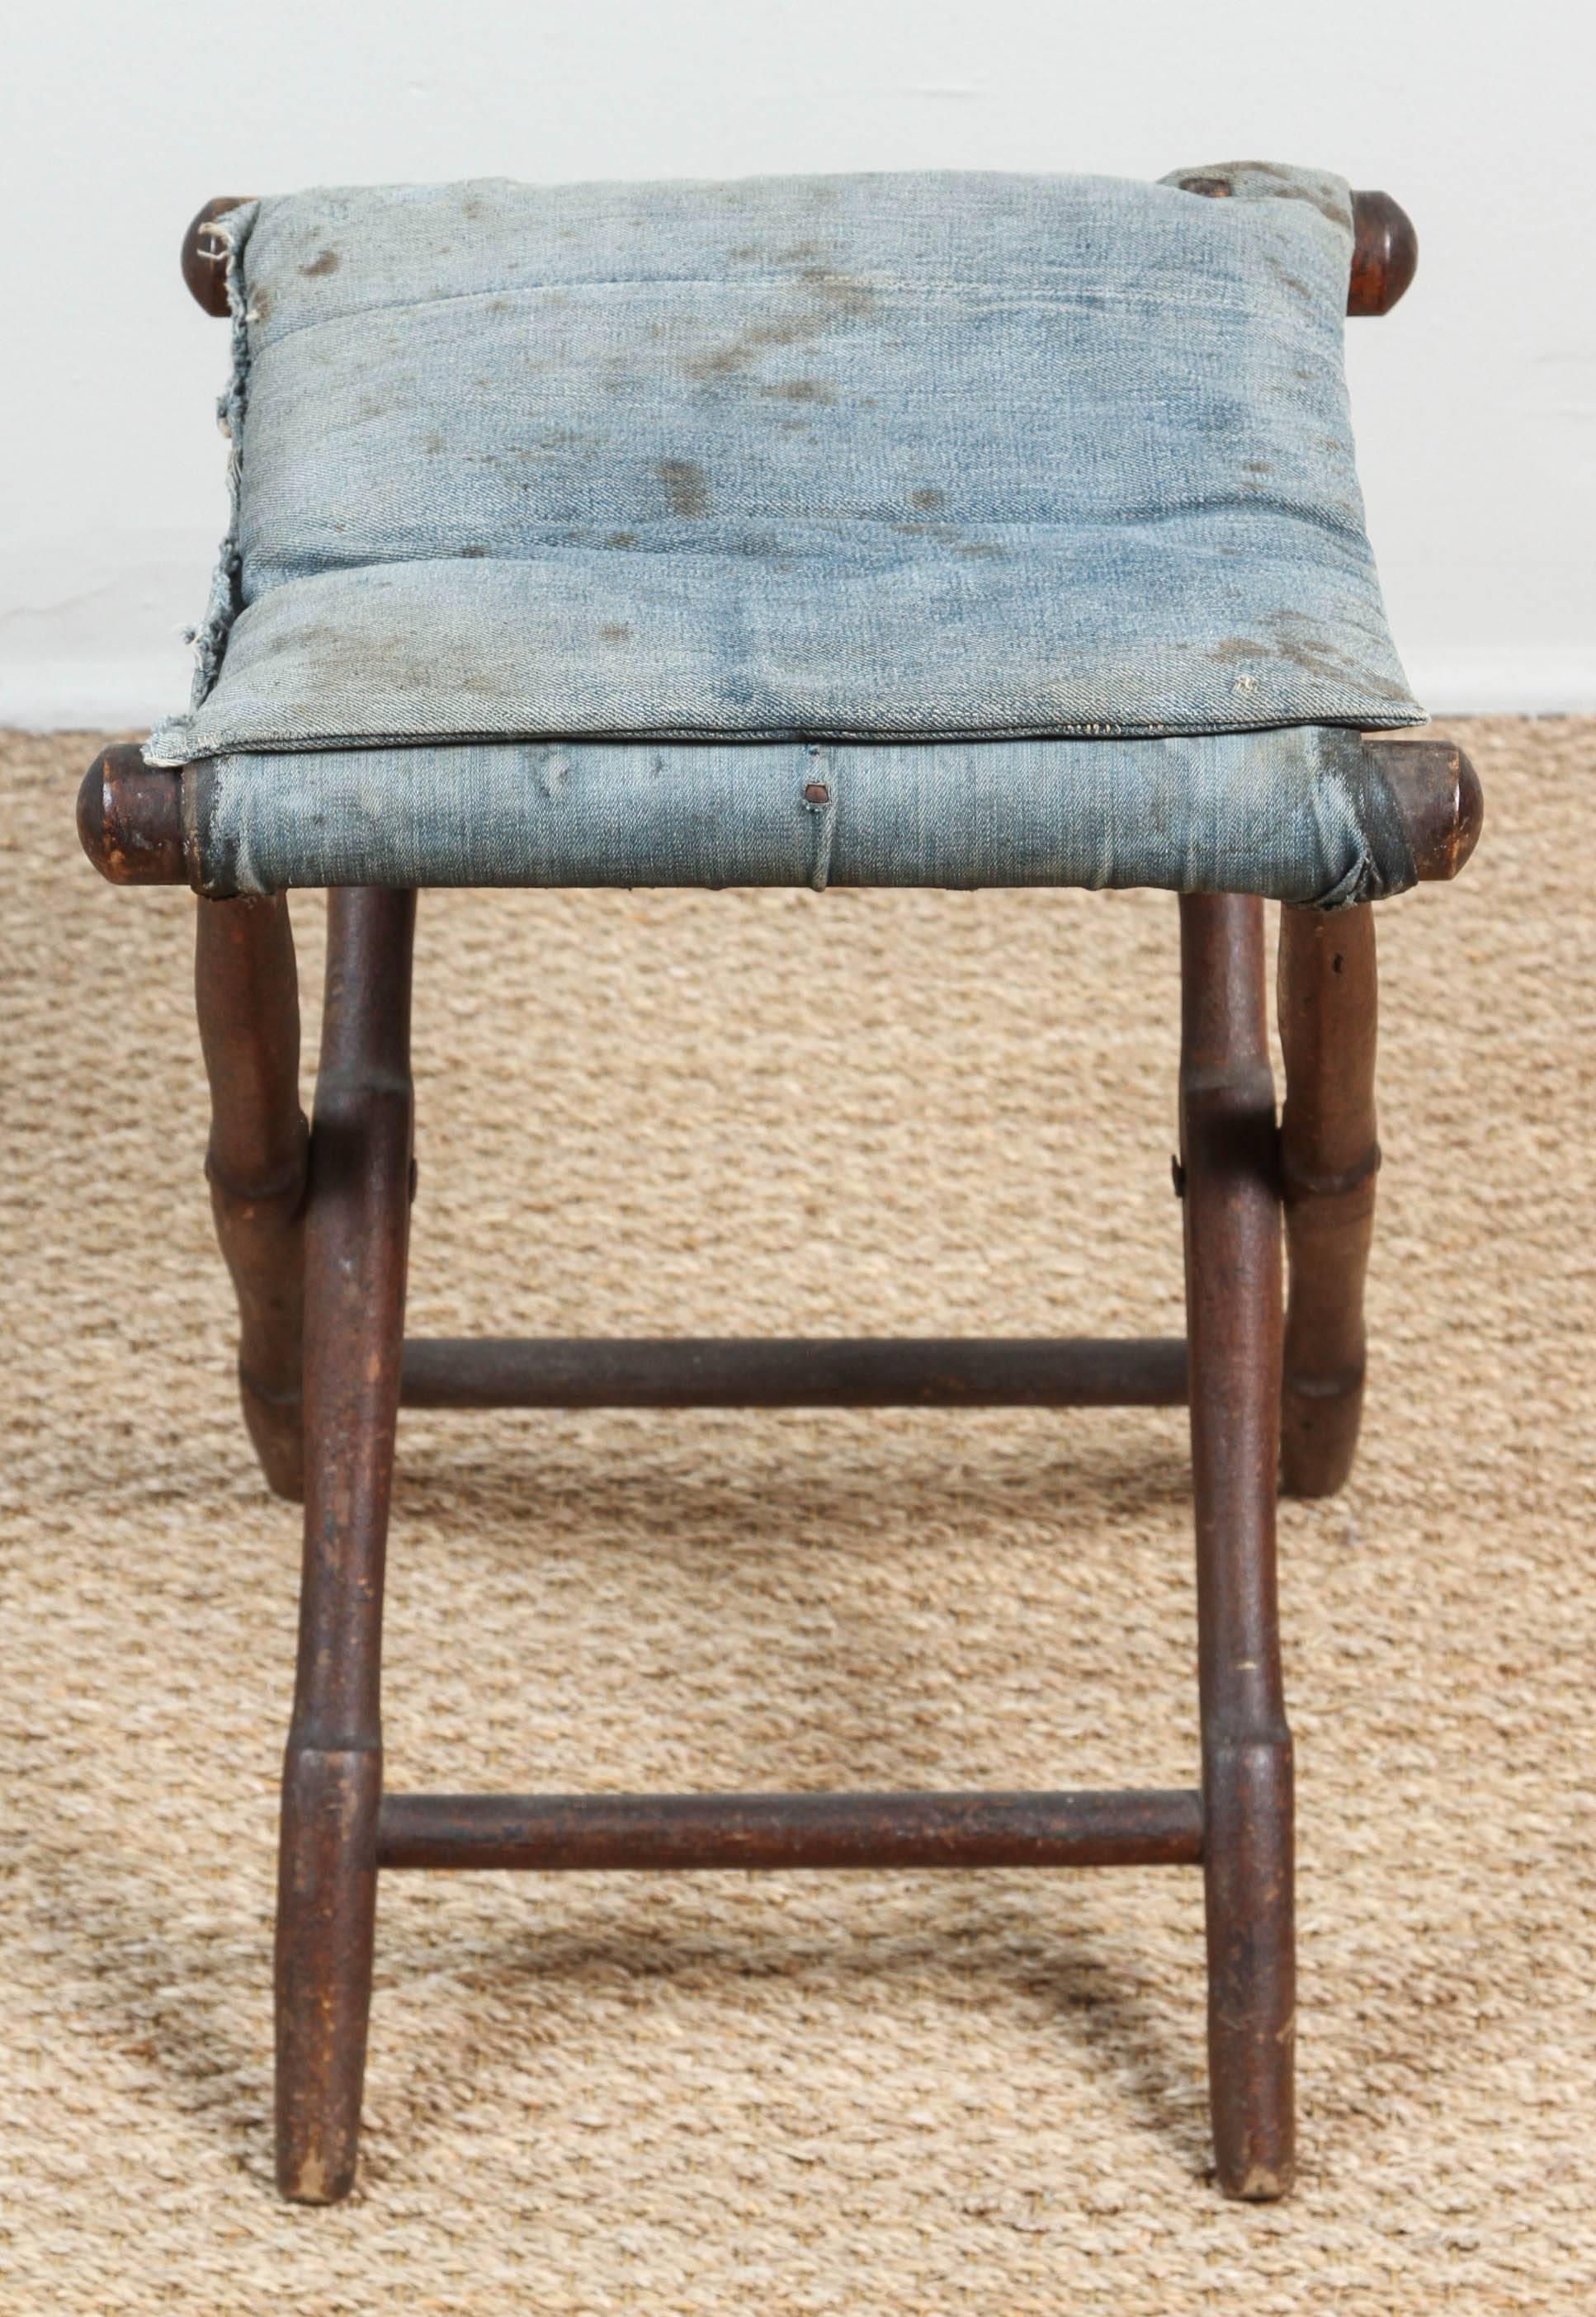 Vintage Folding Stool with Distressed and Faded Denim In Good Condition For Sale In Los Angeles, CA